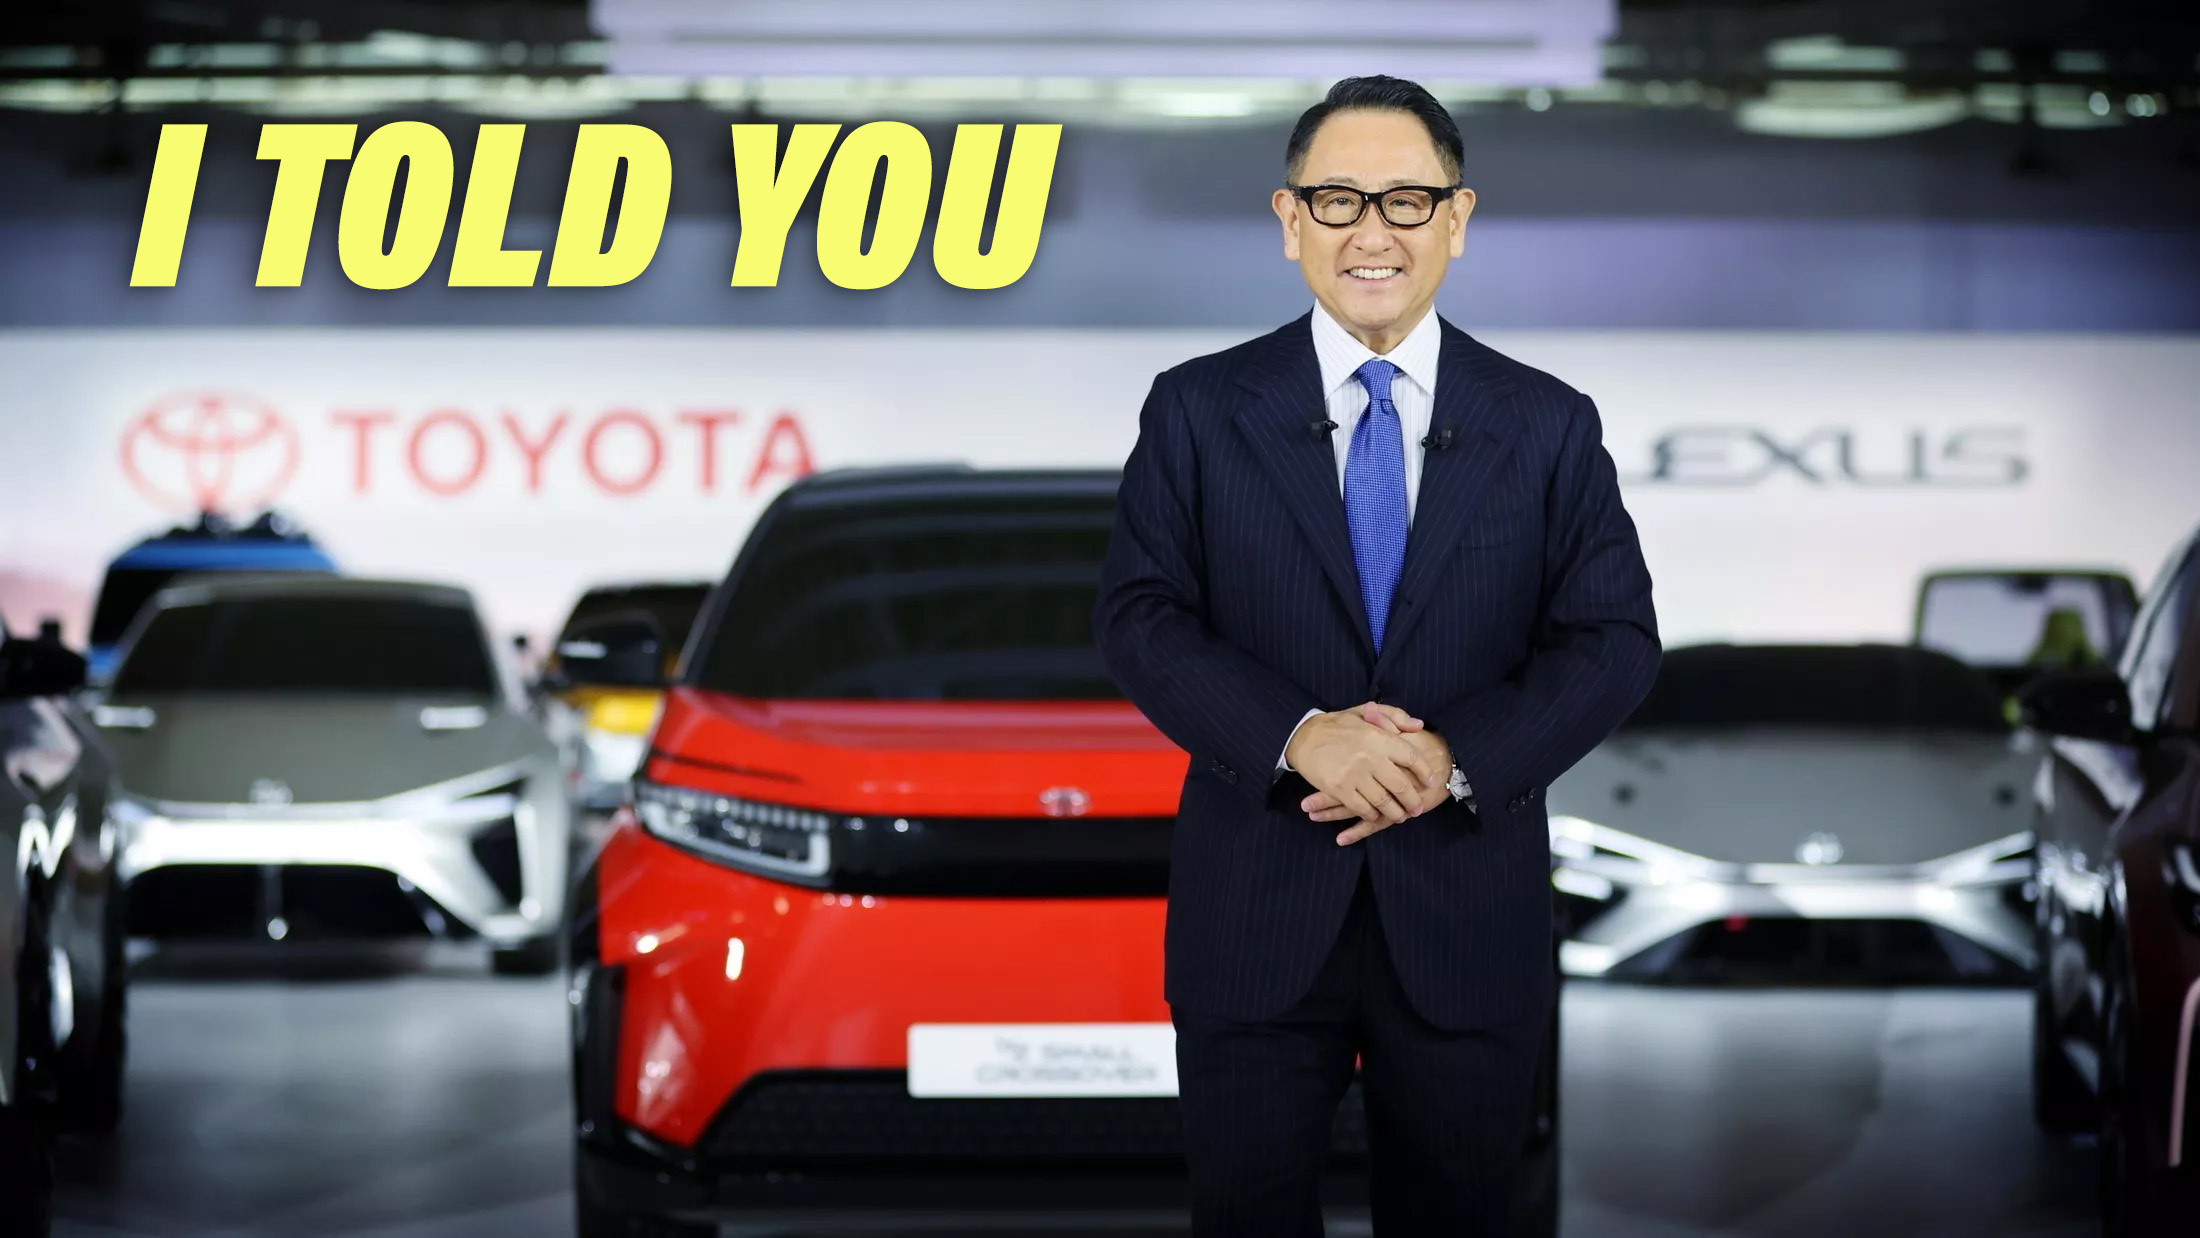 Toyota Chairman Says People Are Finally Seeing the Reality About EVs - WSJ